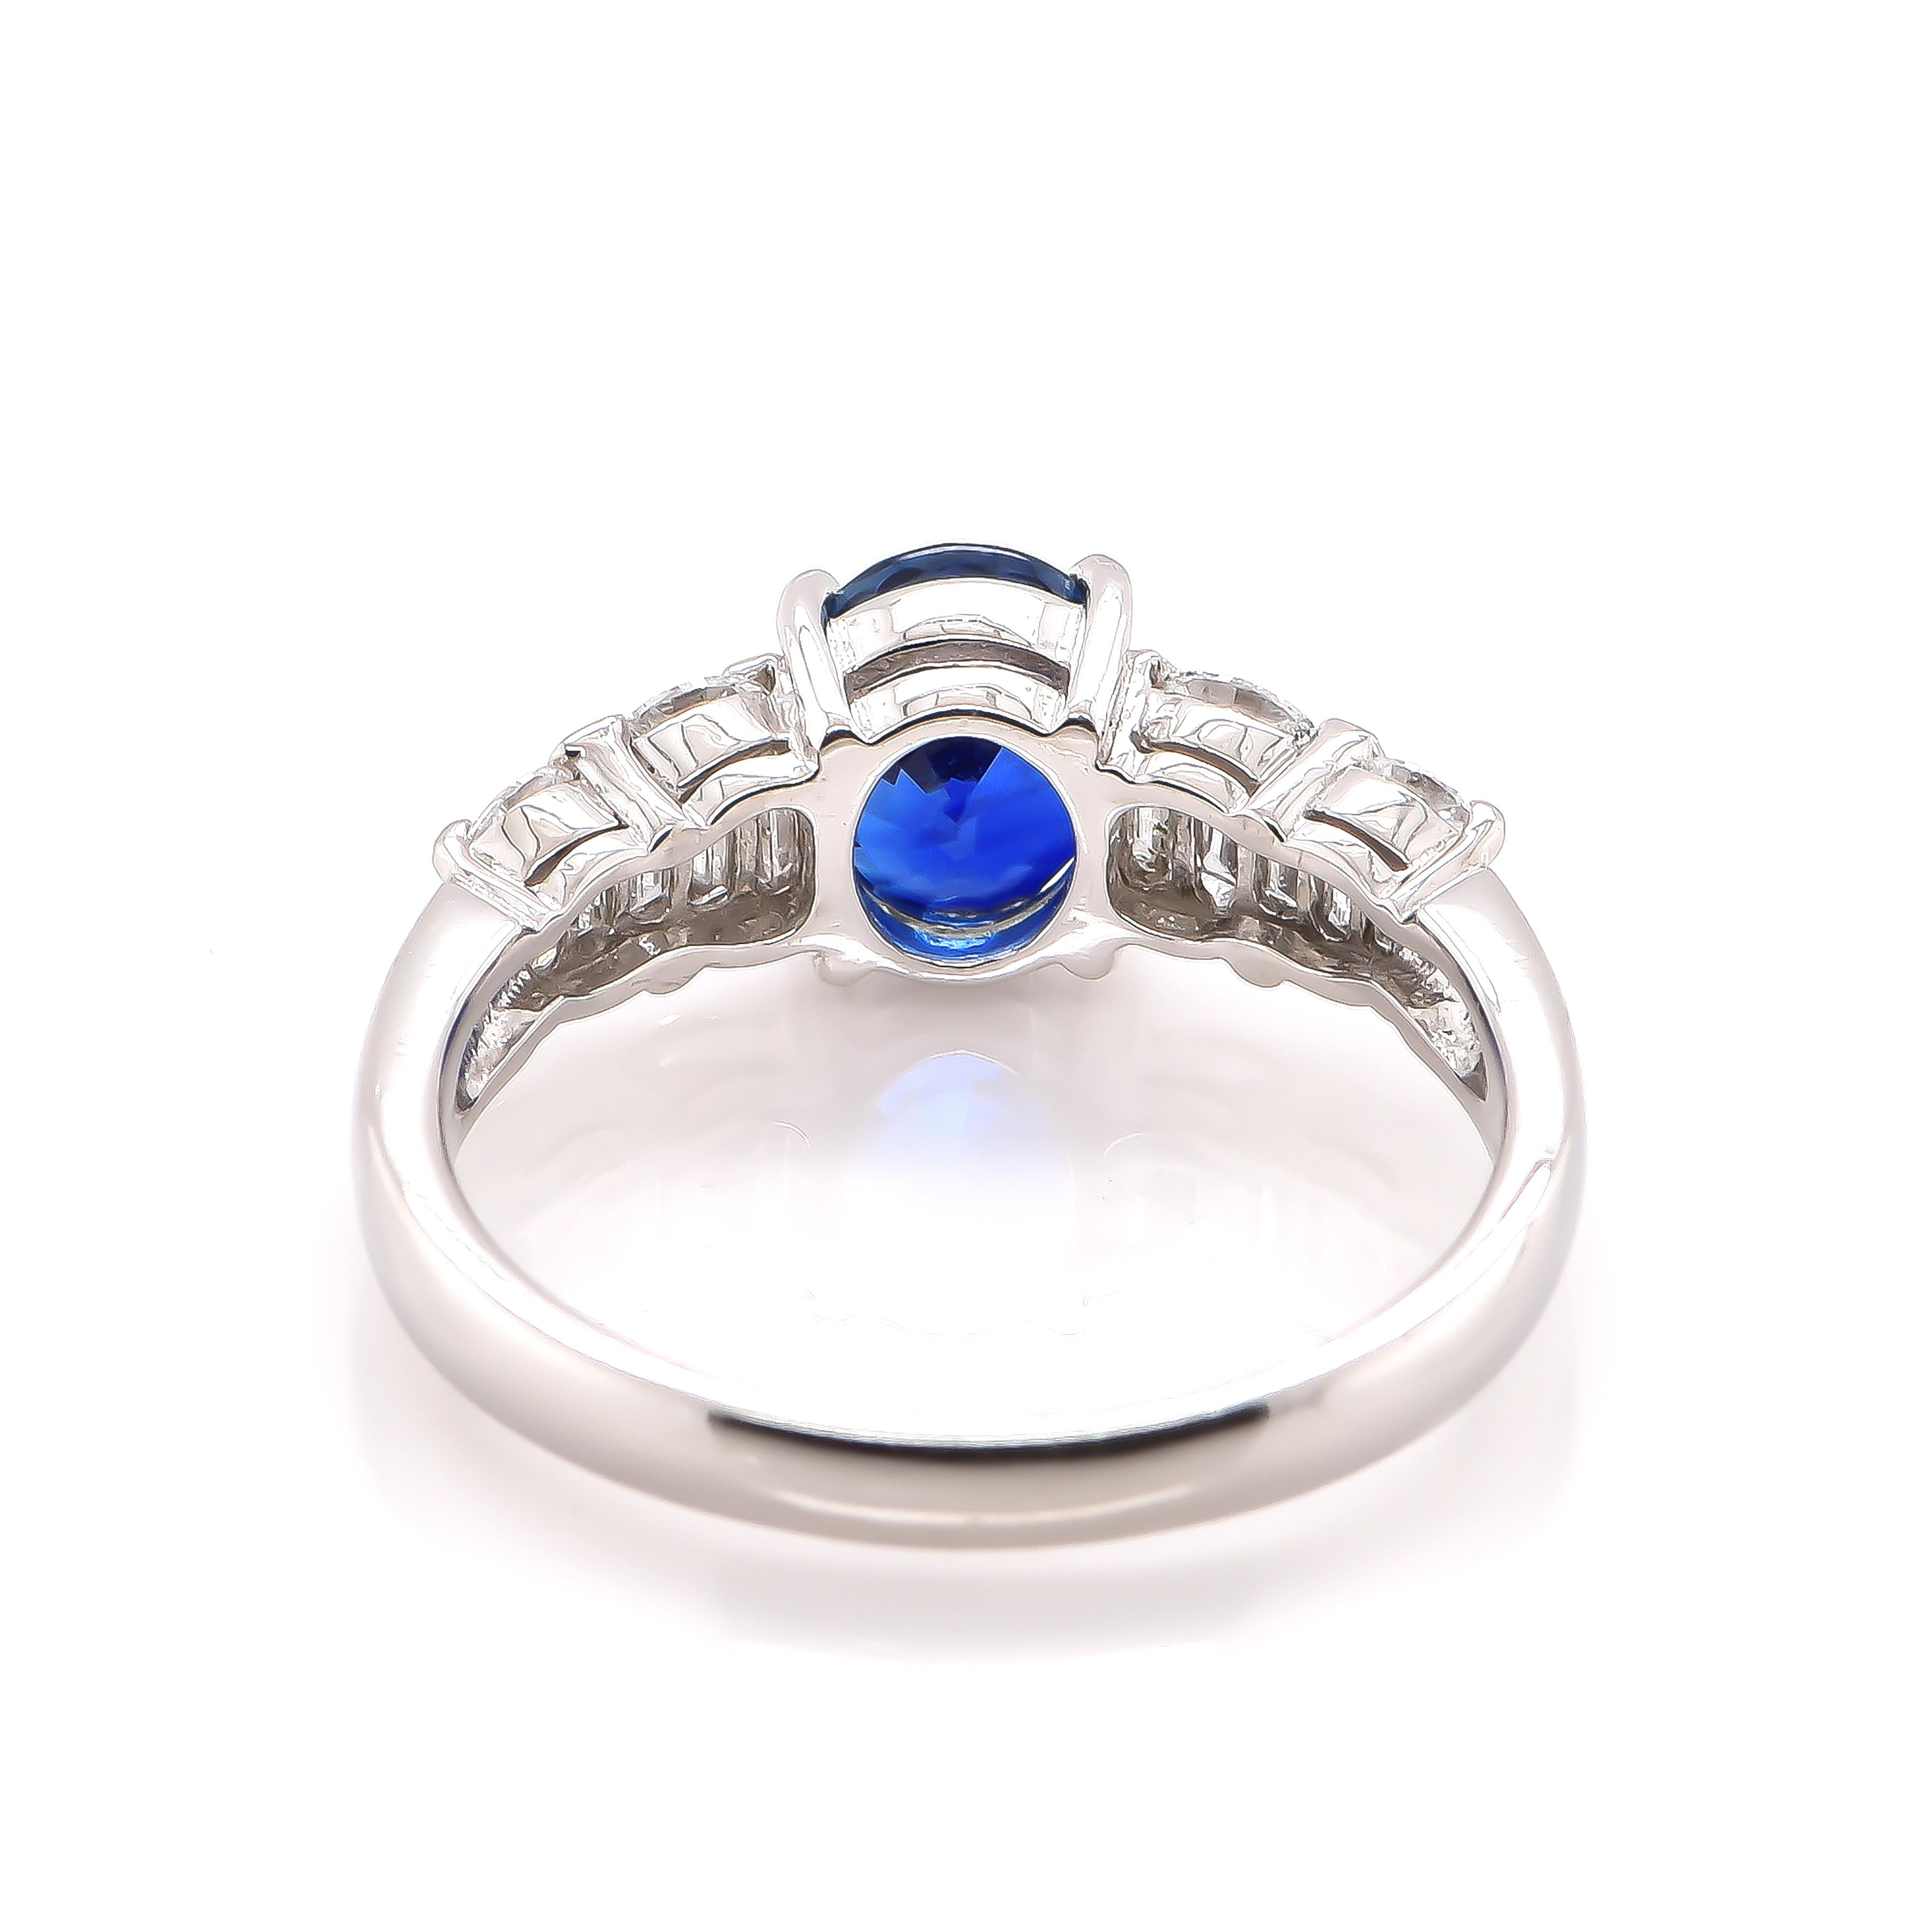 Women's 1.61 Carat Natural Royal Blue Sapphire and Diamond Ring Made in Platinum For Sale